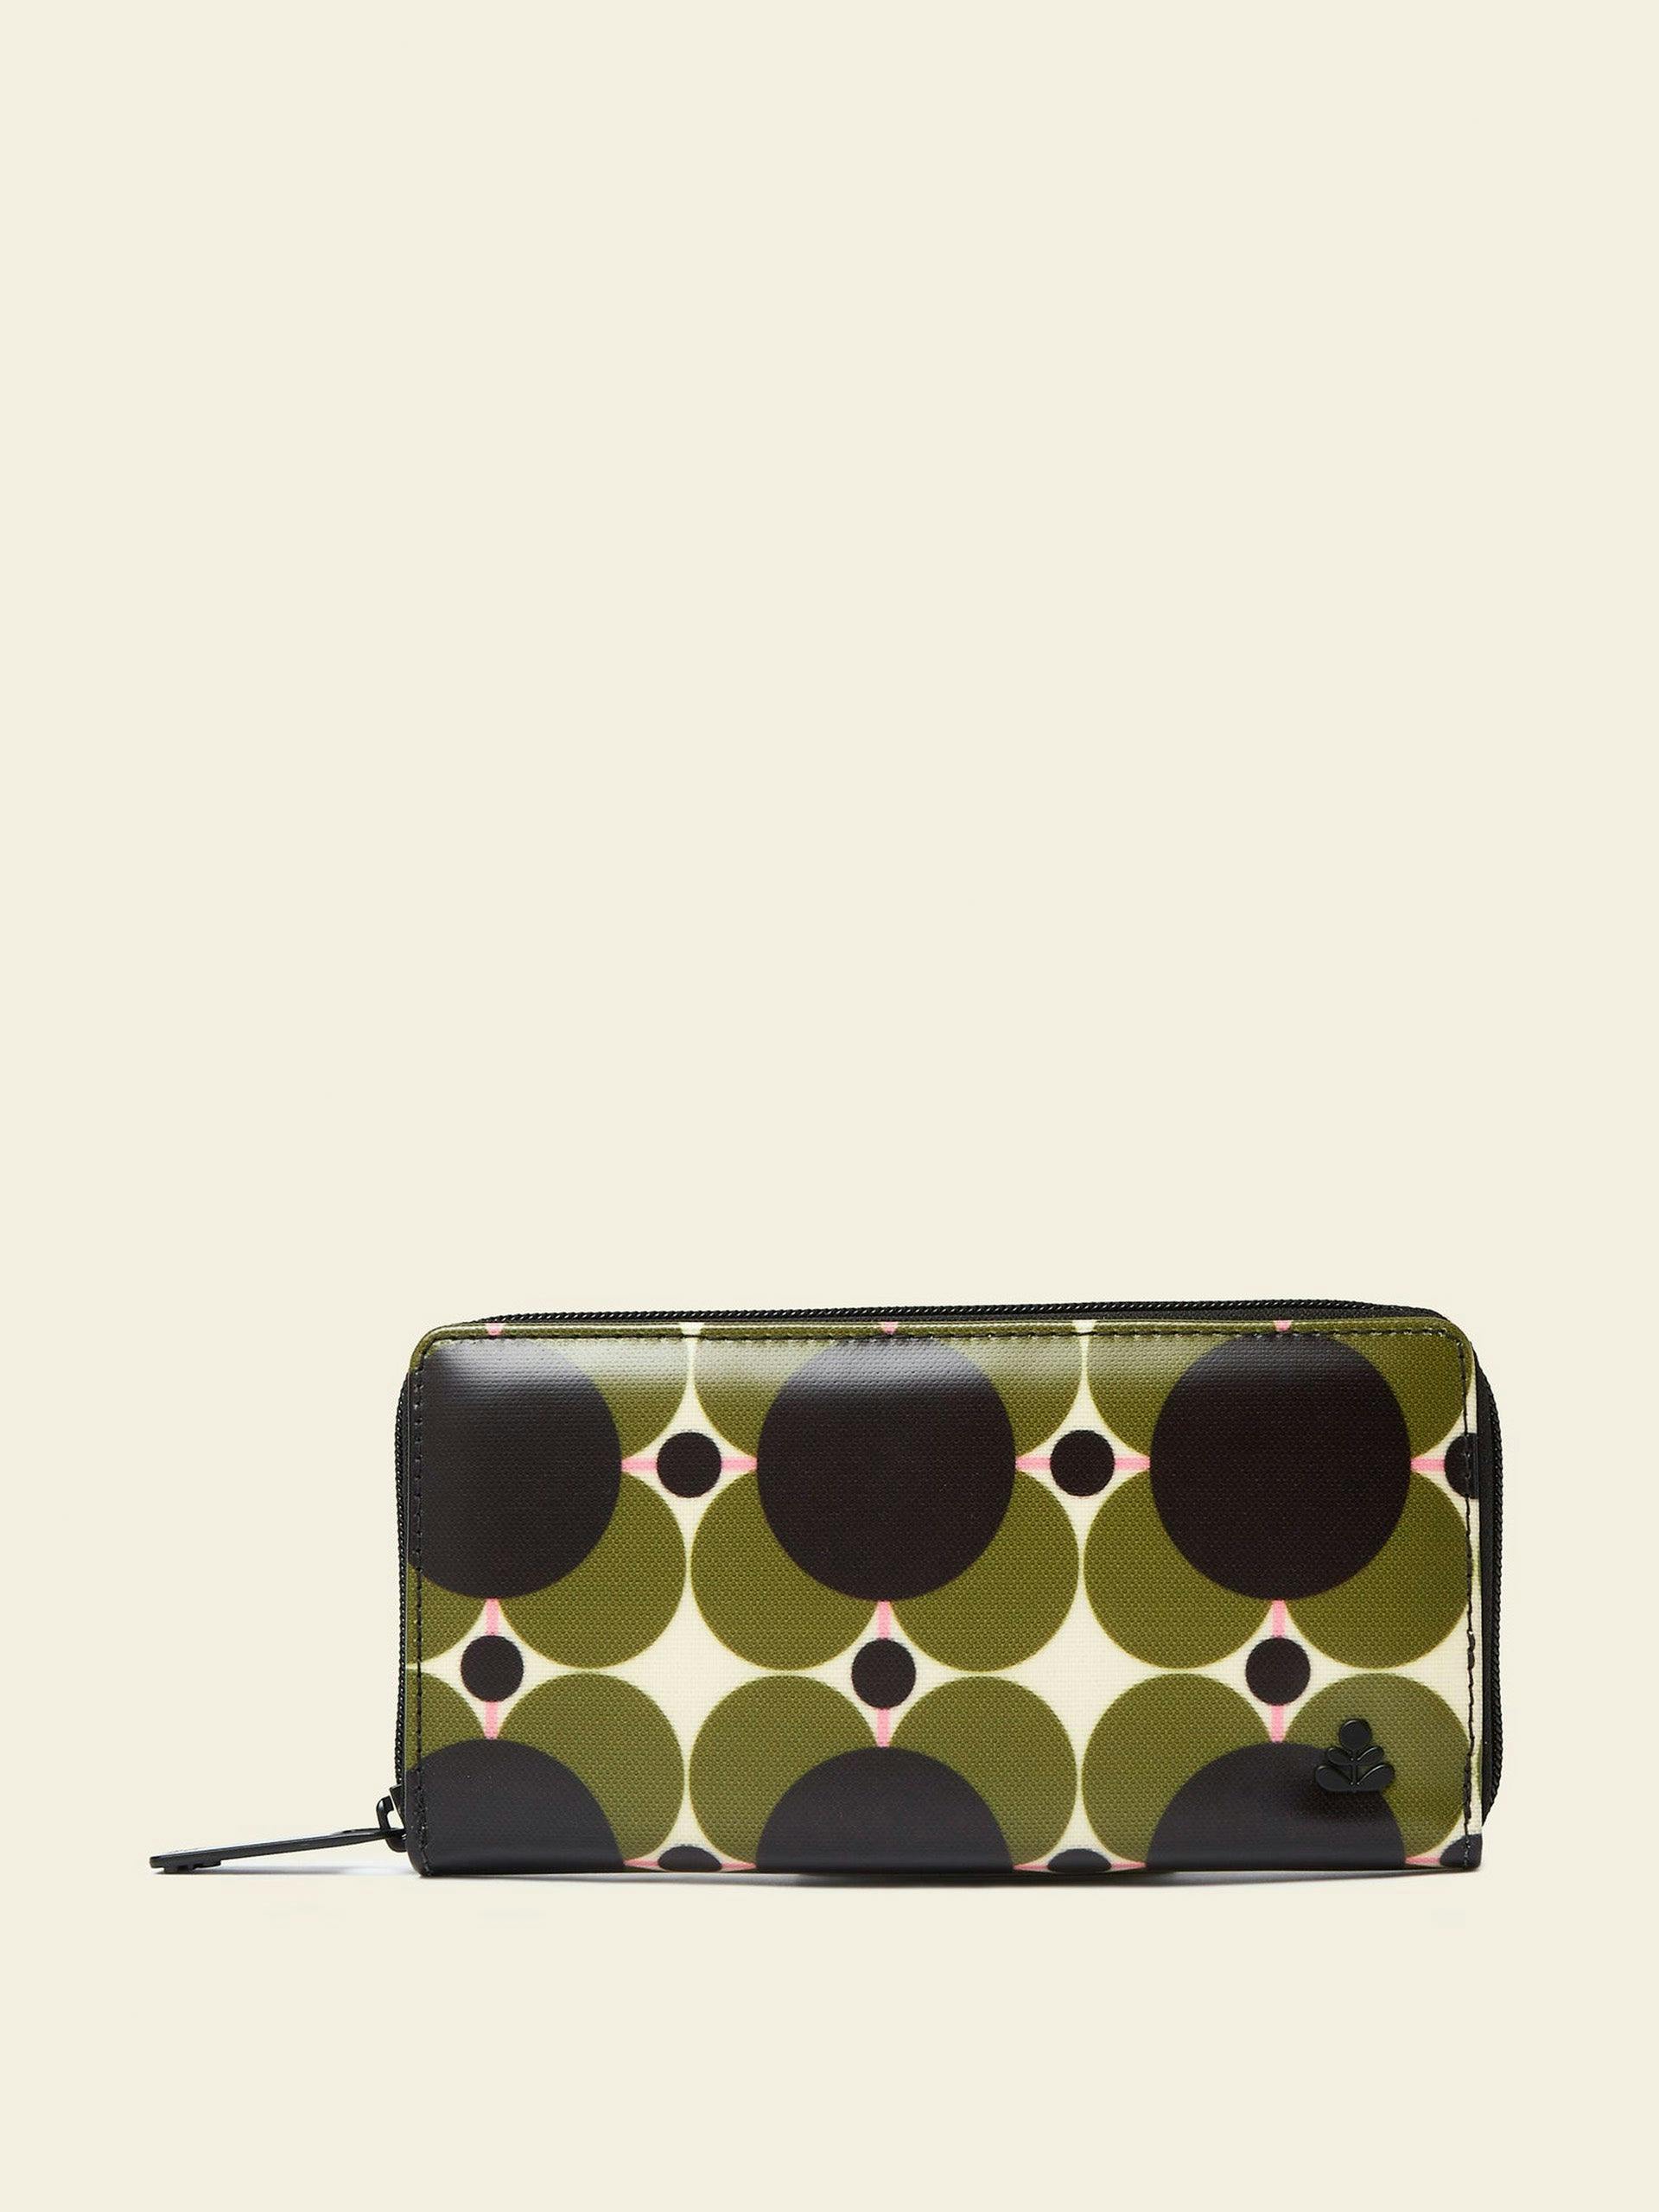 Forget-Me-Not wallet in Atomic Flower Khaki